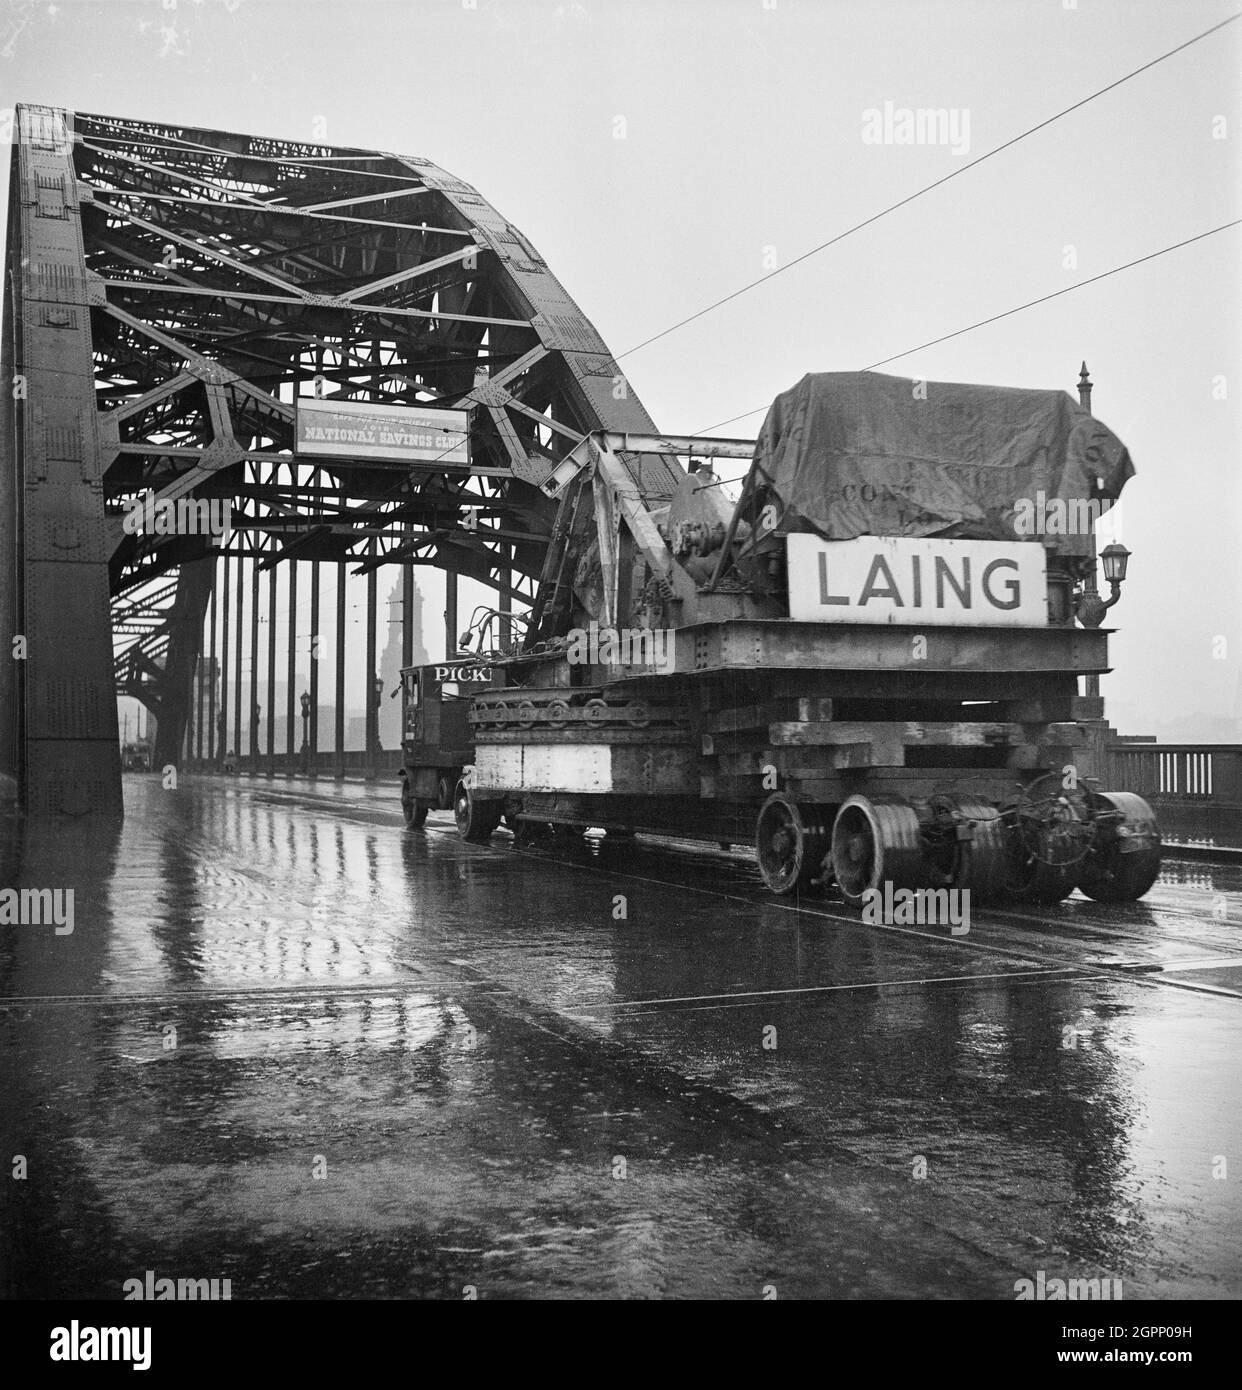 A Pickfords low loader transporting a W90 walking dragline excavator across the Tyne Bridge on its journey to Whitley Bay opencast coal site. This photograph is part of a batch showing a Ransome Rapier W90 walking dragline excavator being transported through the streets of Newcastle-upon-Tyne. It was on a 280 mile journey from one Laing contract at Carrington Coppice opencast coal mine in Derbyshire to another at Whitley Bay opencast coal mine. Stock Photo